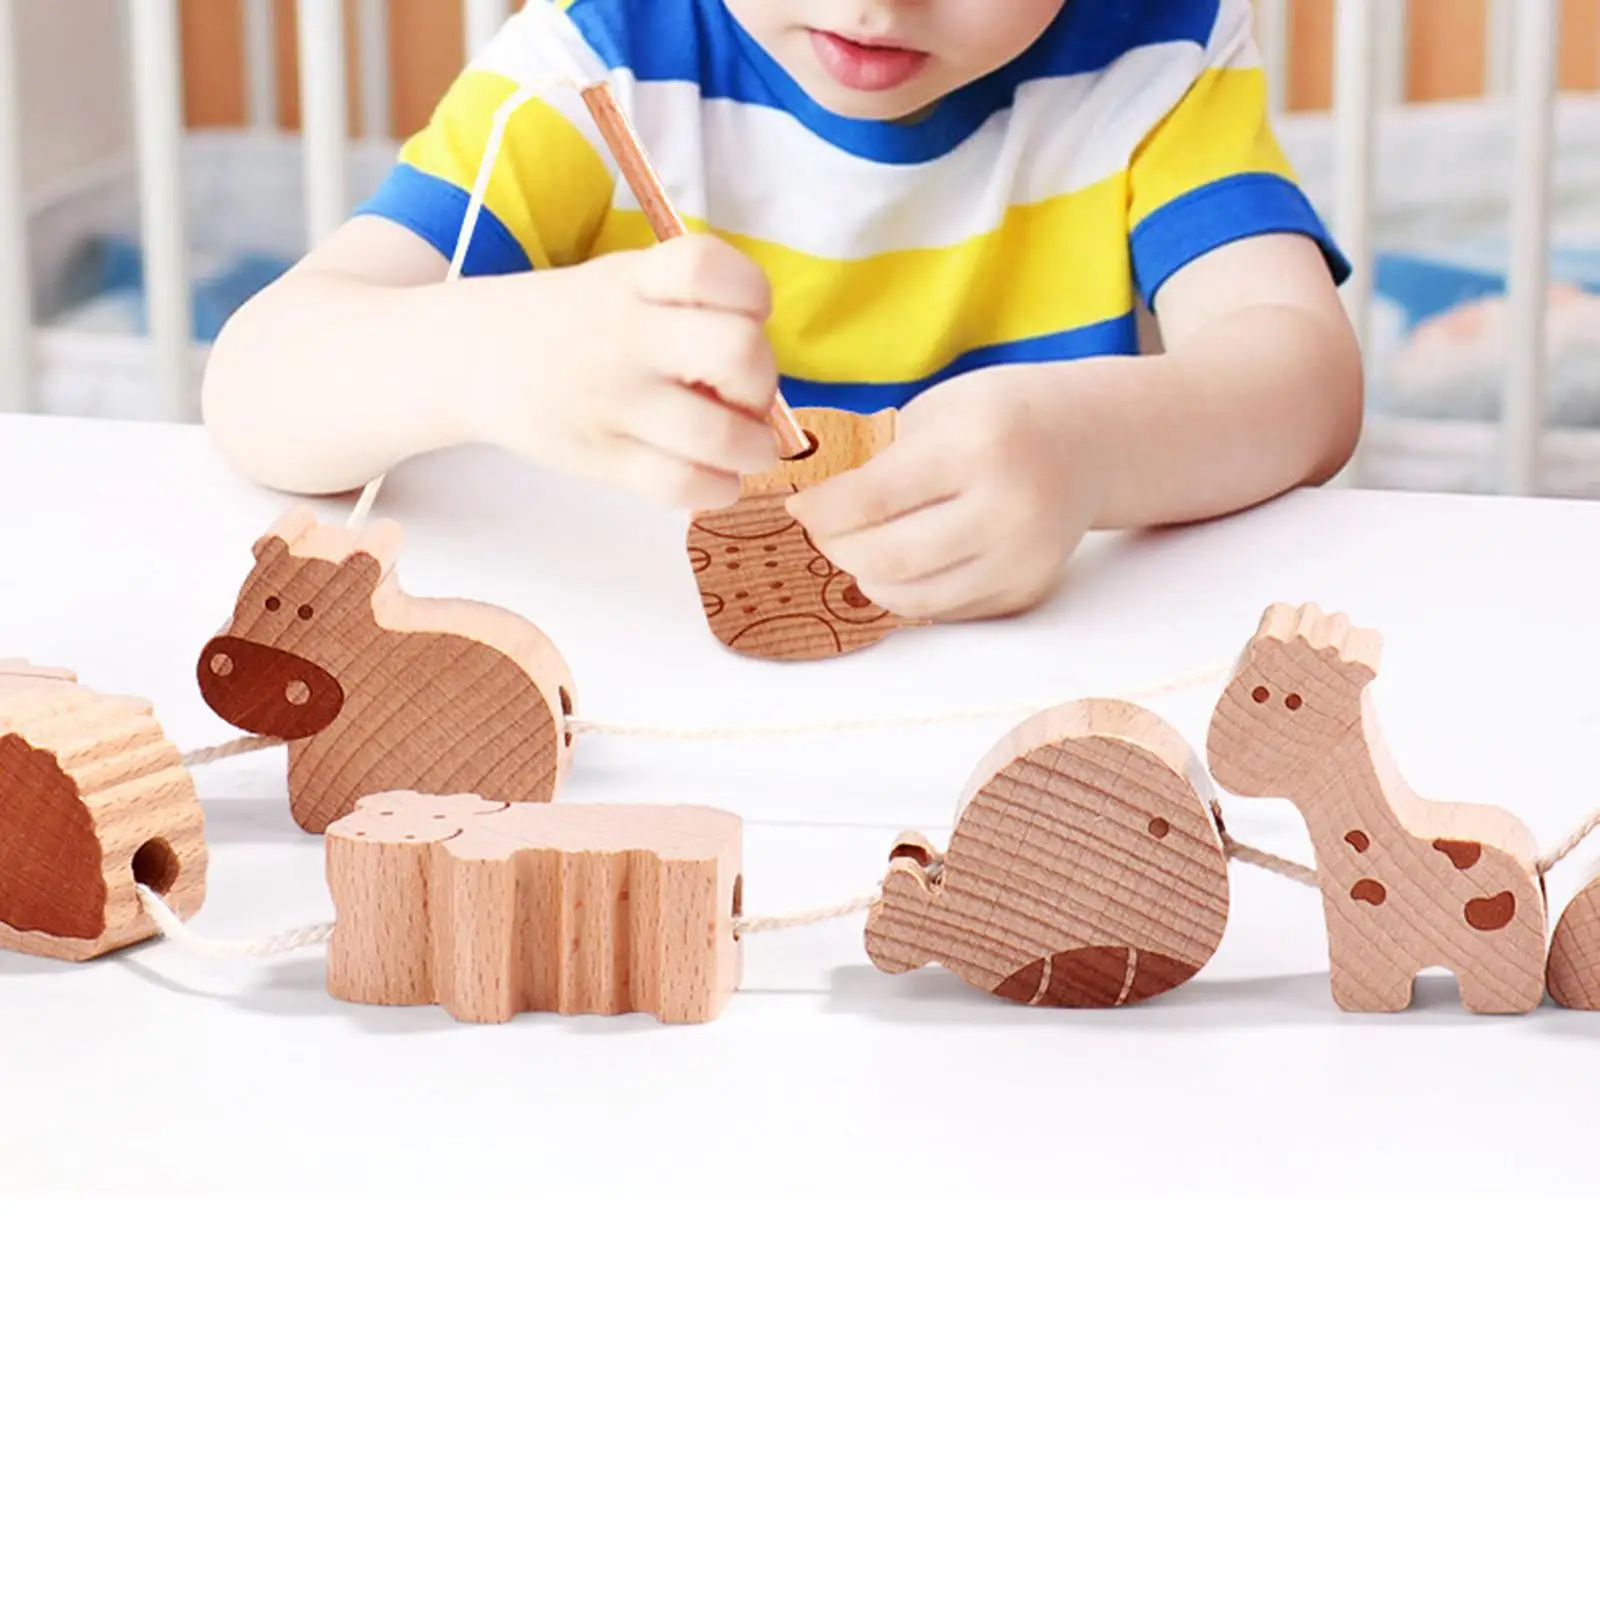 16x Wooden Animal Blocks Lacing Toy Wooden Stacker Game for Children Kids